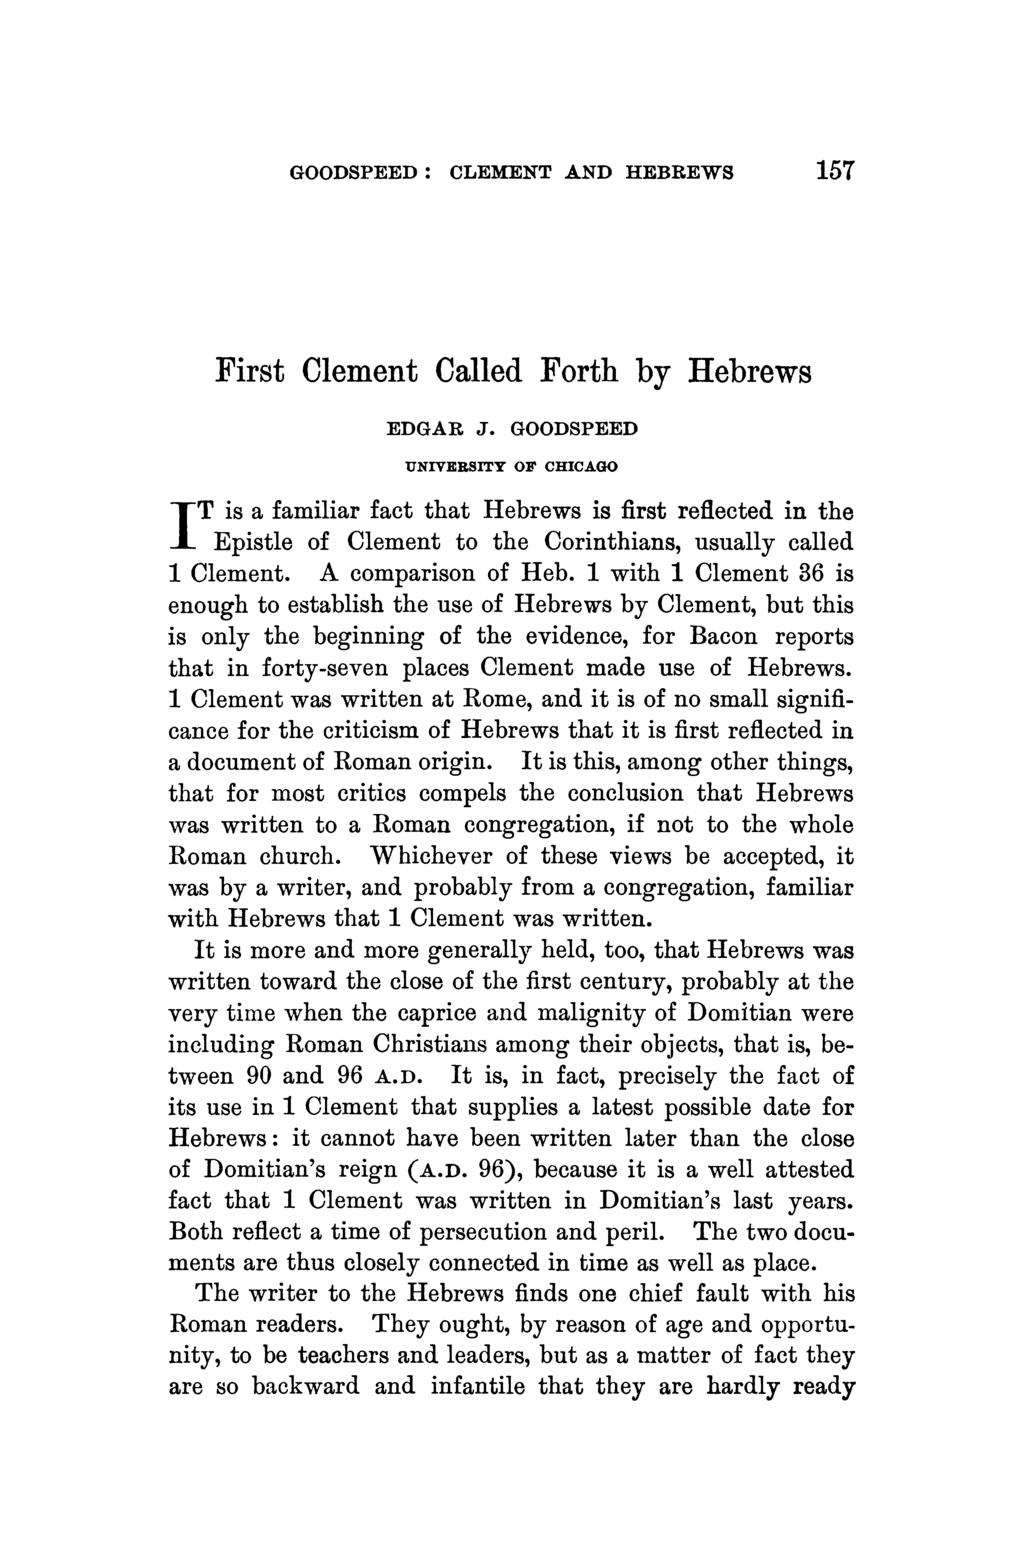 GOODSPEED: CLEMENT AND HEBREWS 157 First Clement Called Forth by Hebrews EDGAR J.